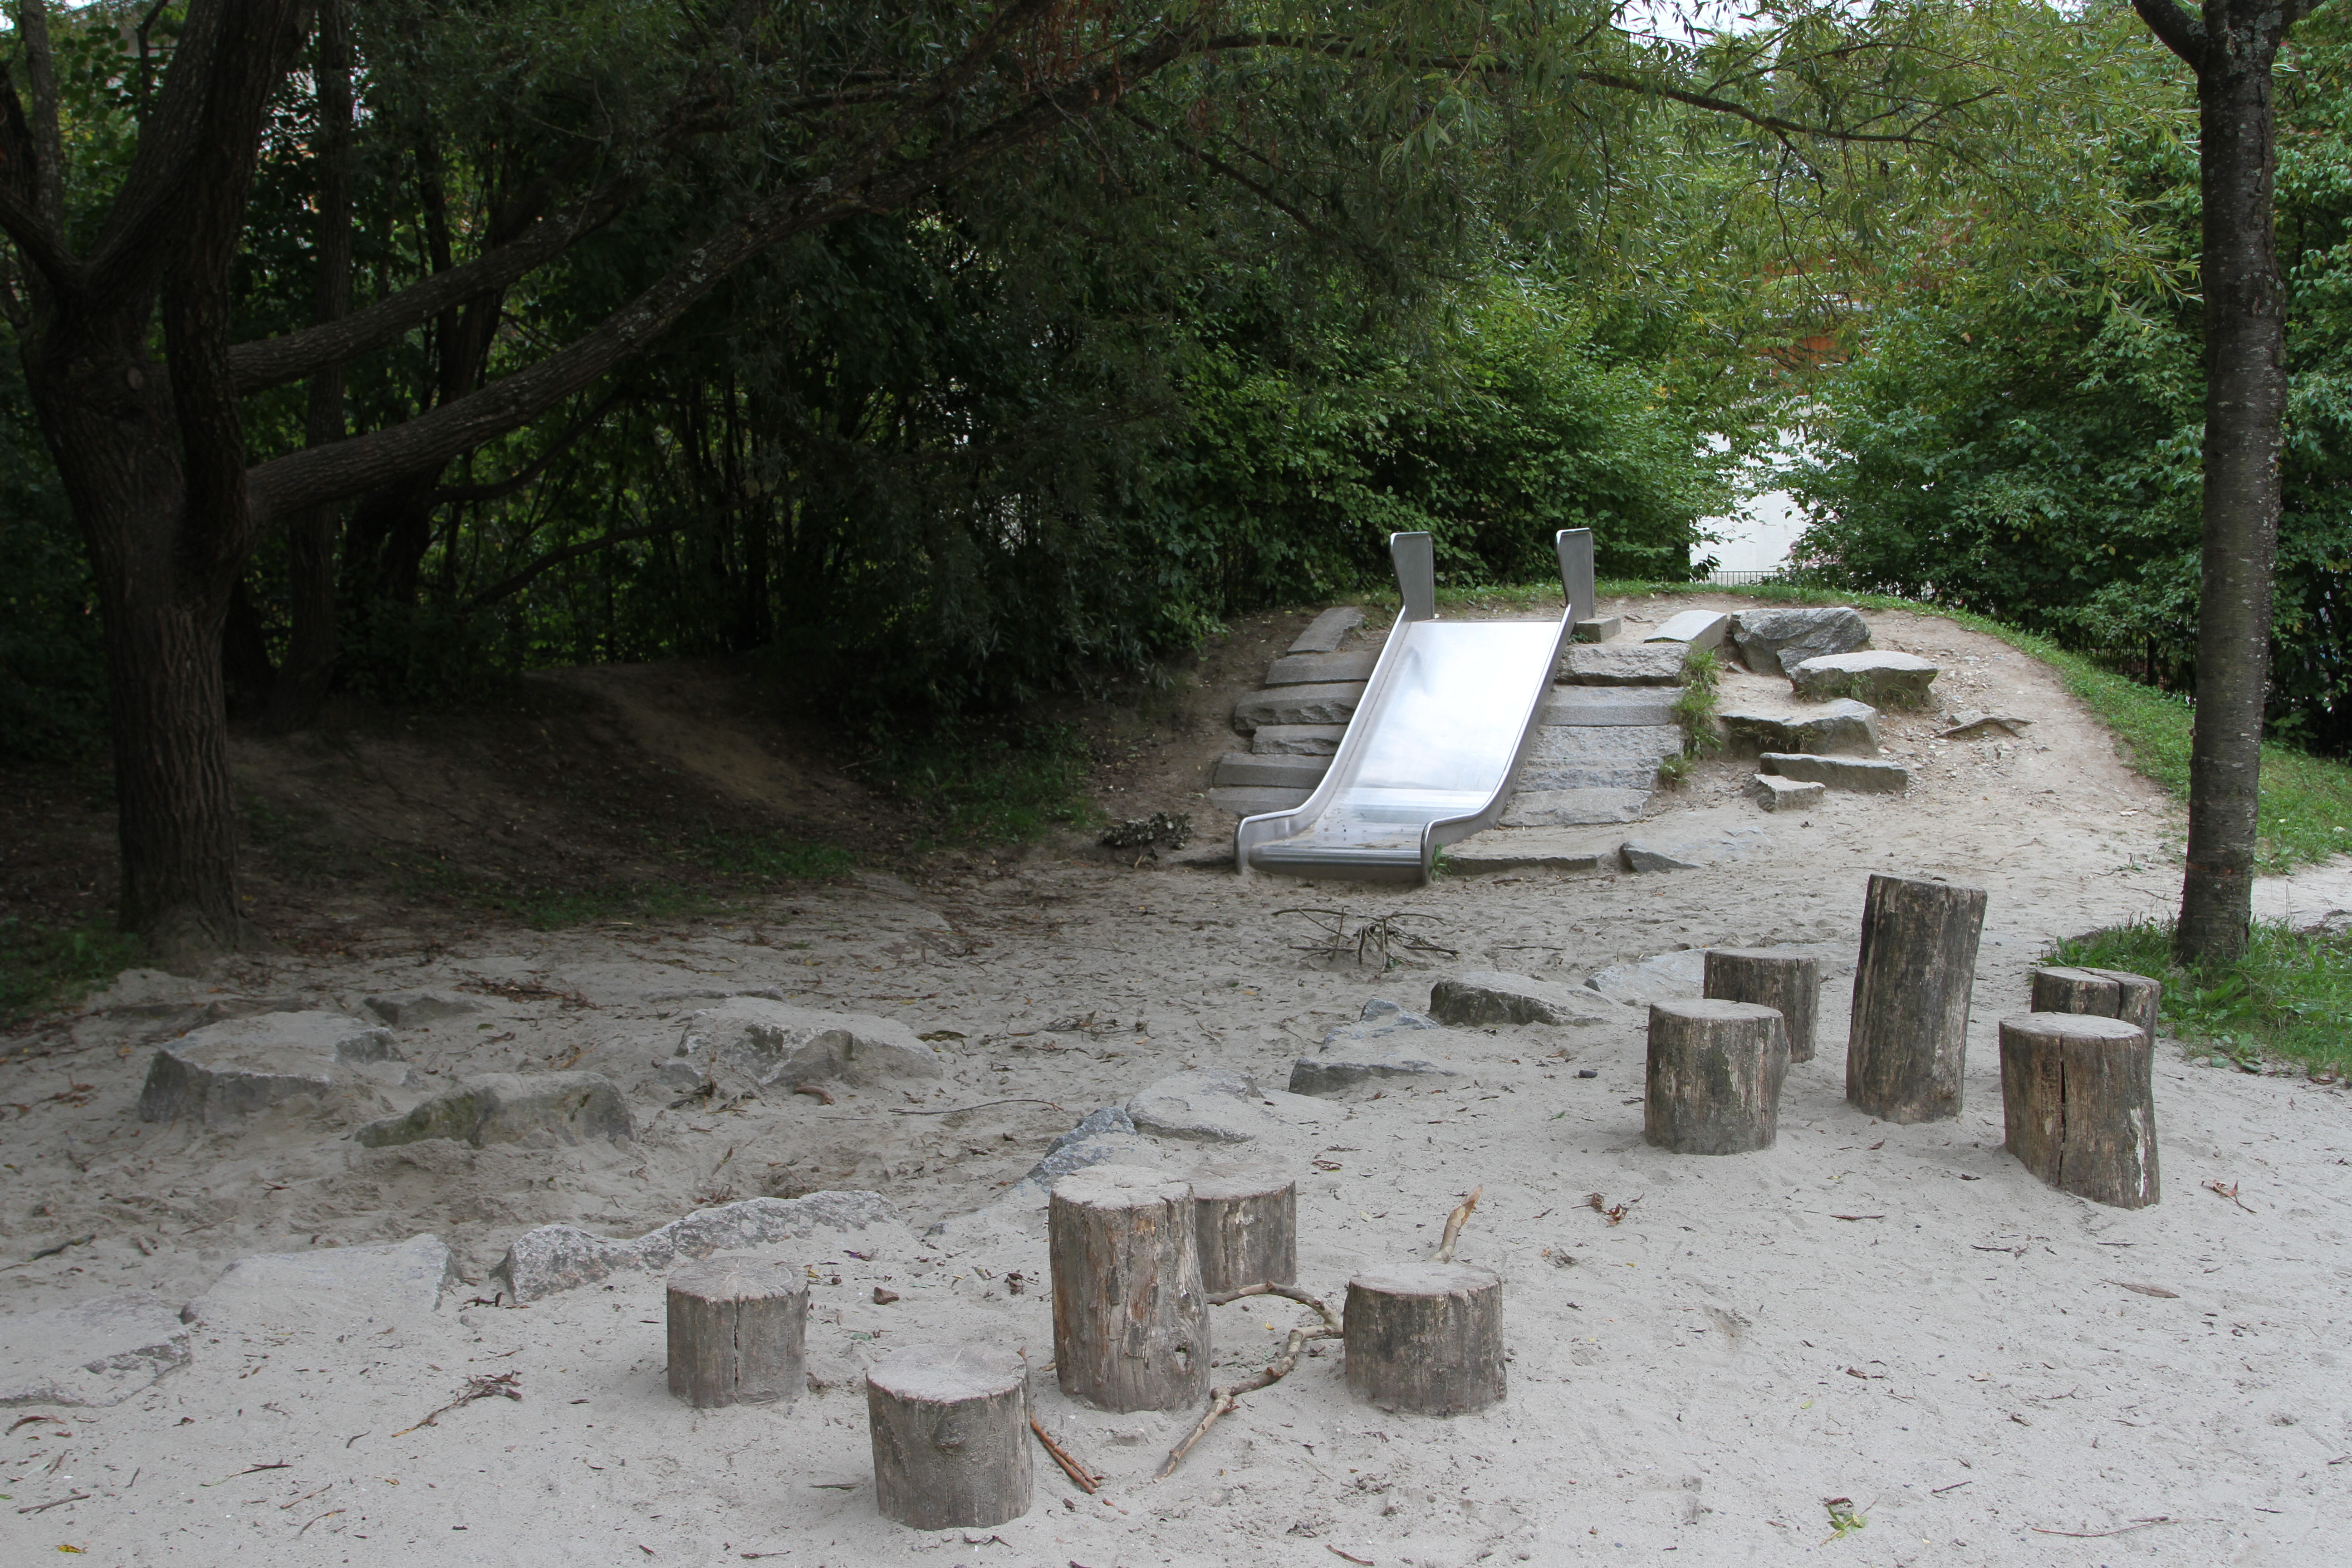 Photo of a metal slide attached to the side of a small hill. Tree stumps in front of it serve as benches. Surrounding this small clearing, green, leafy trees.